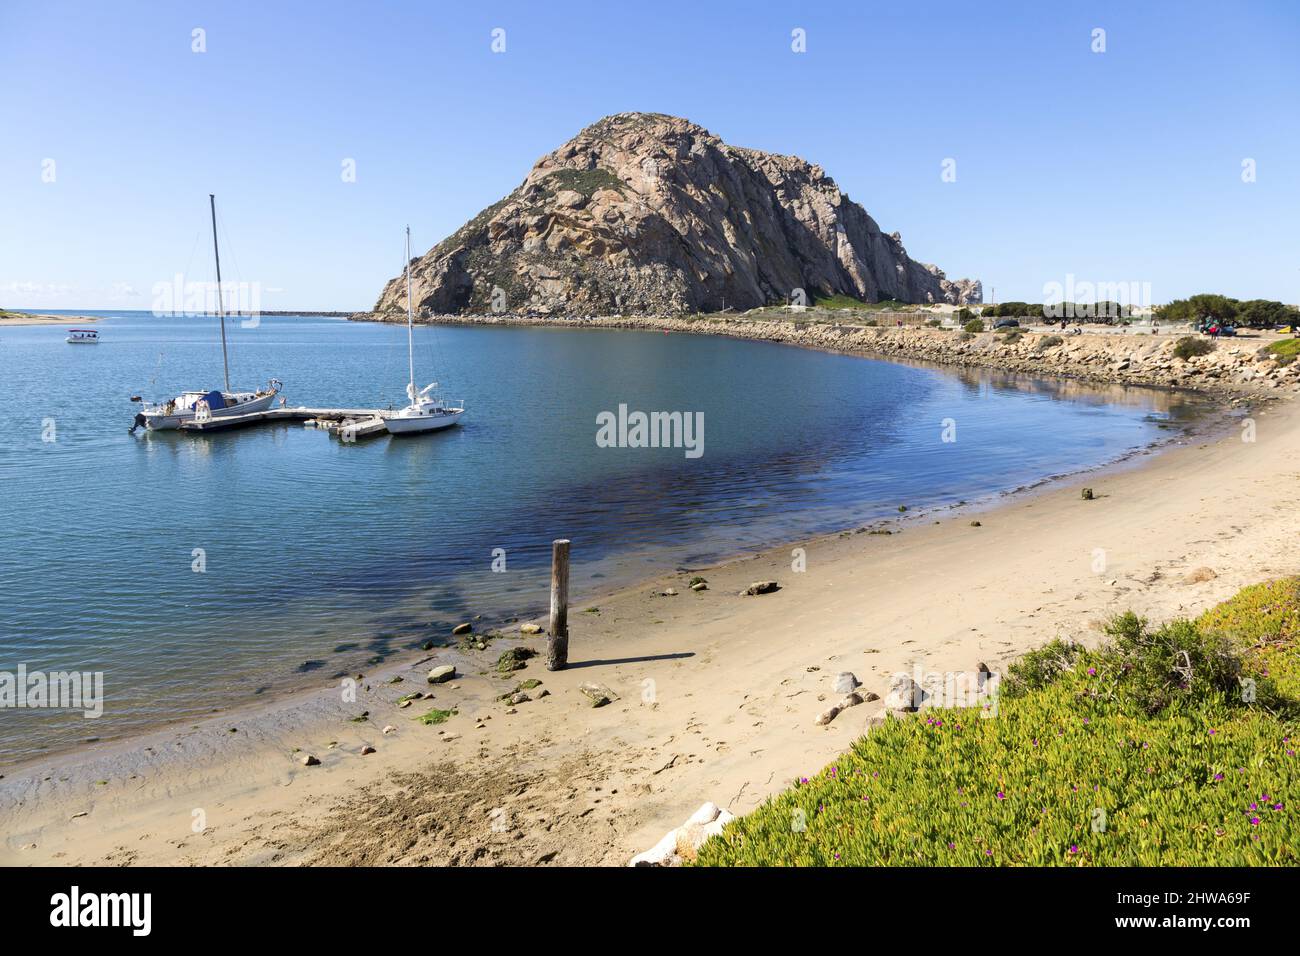 Morro Bay Rock and Harbor or Harbour Beach Landscape View with moored Yacht Boats along Scenic Pacific Ocean California Coastline Stock Photo